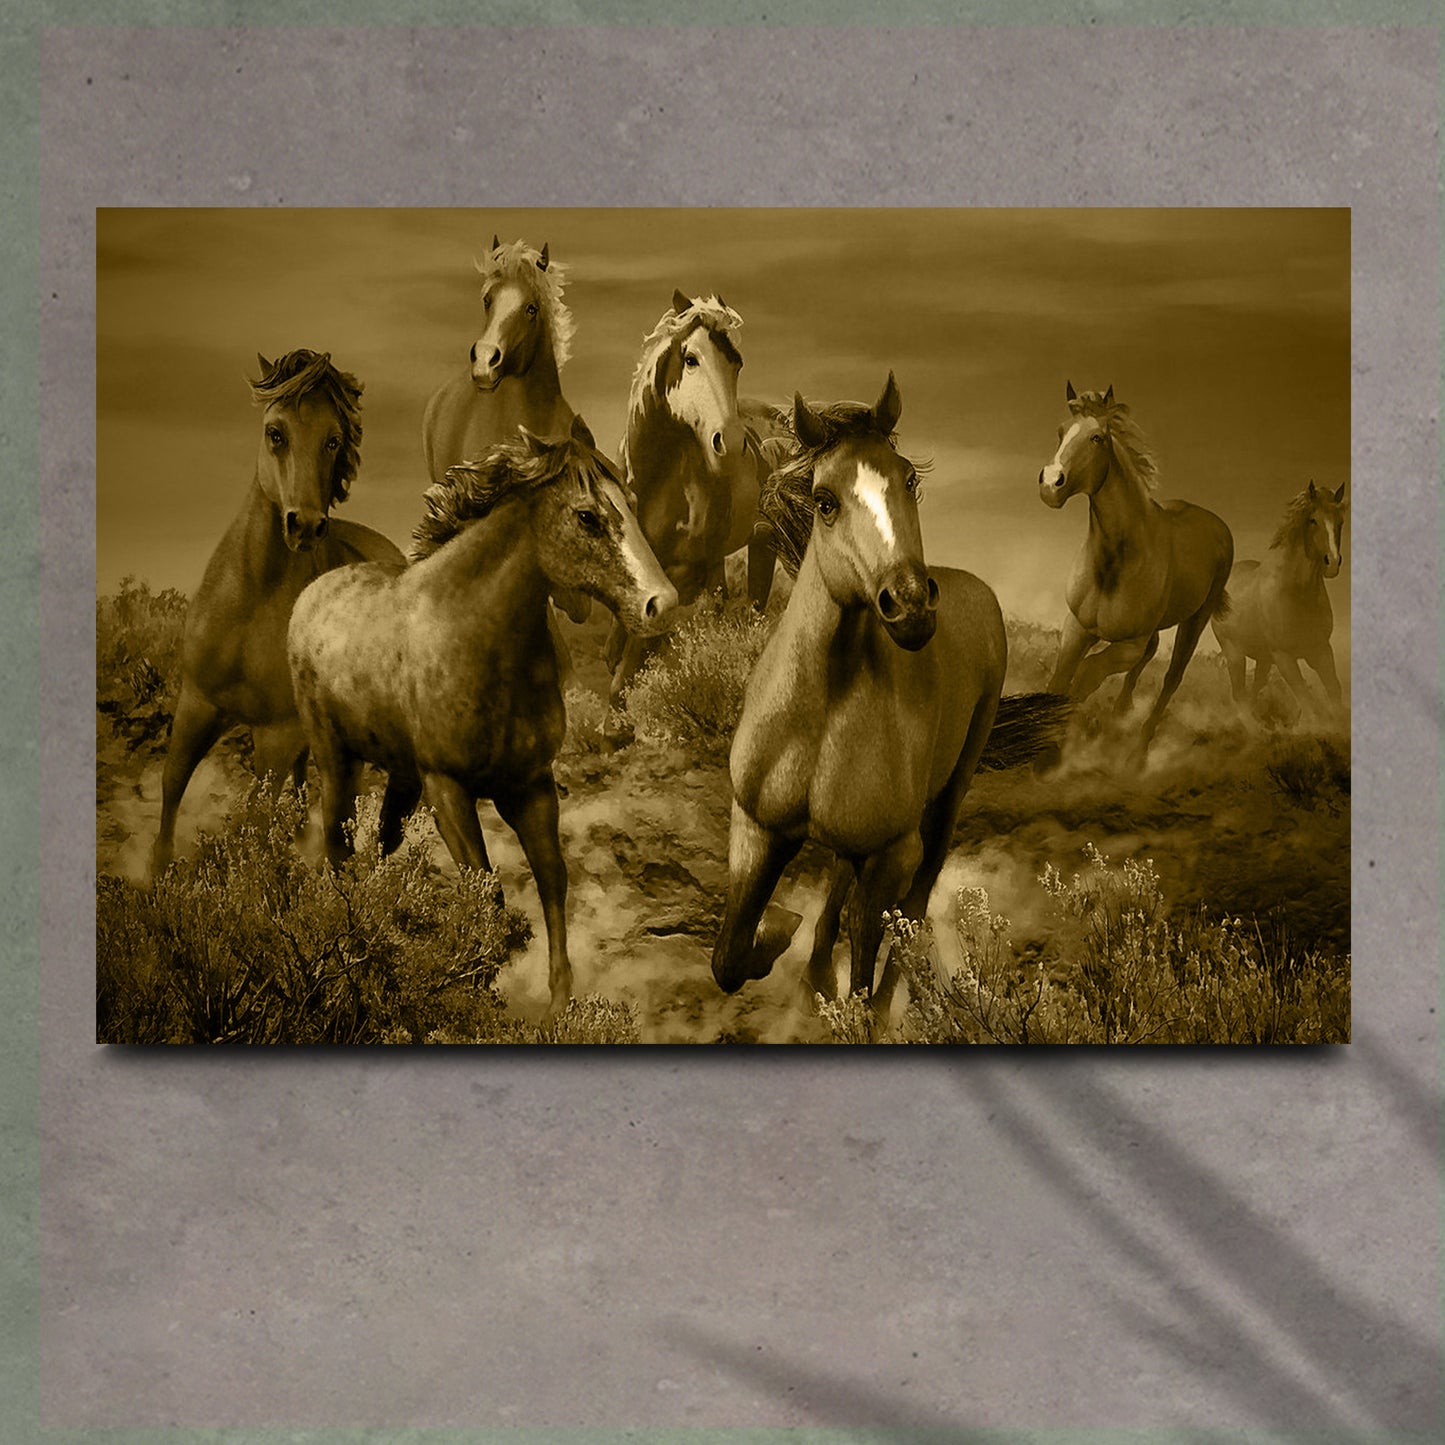 Rustic Herd Of Horses Canvas Wall Art - Image by Tailored Canvases